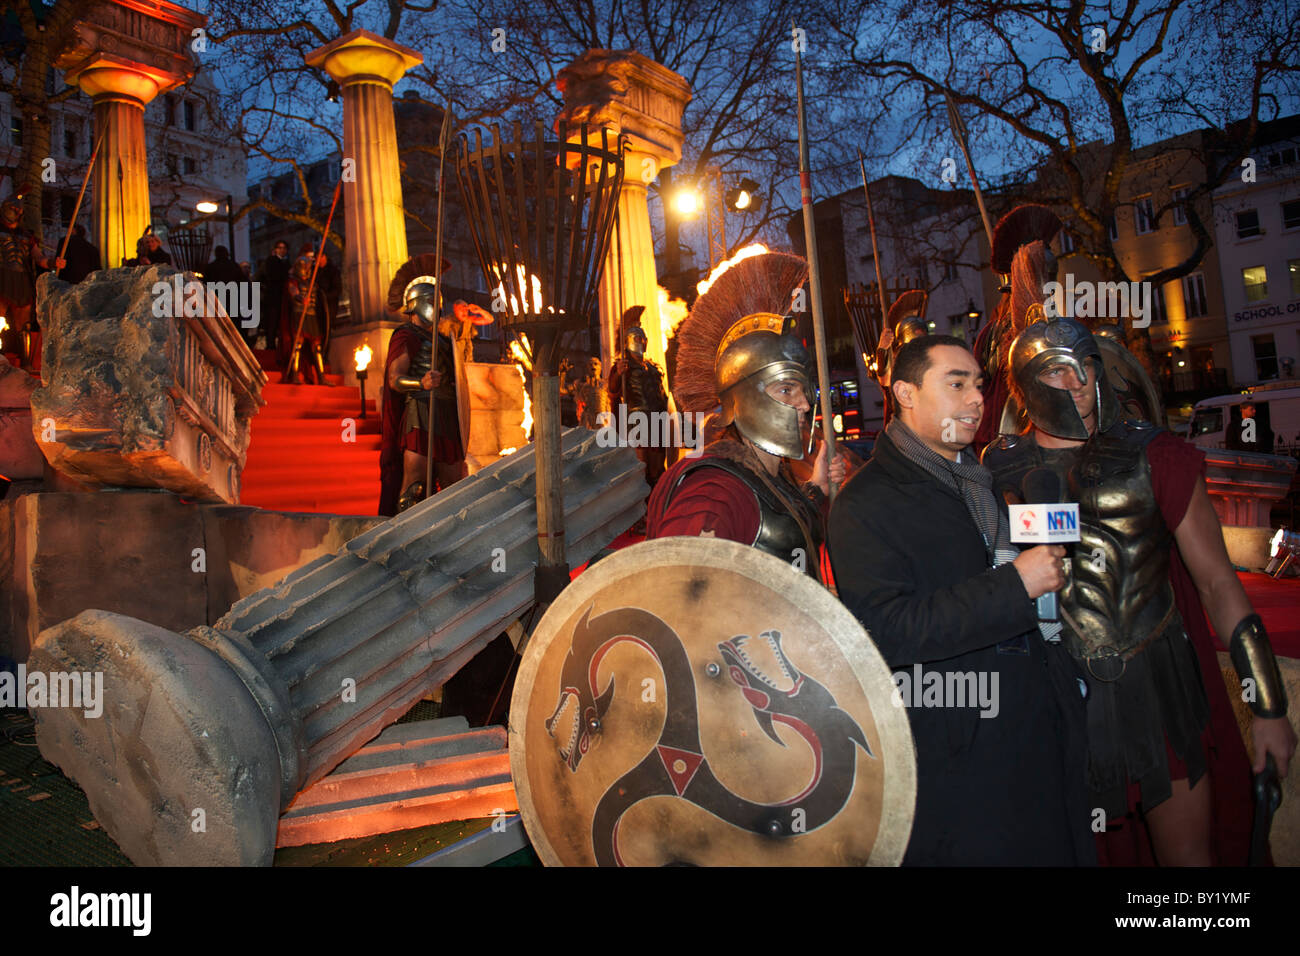 Greek sentries are interviewed at the world premiere of 'The Clash of the Titans,' a remake of the 1981 film, at Empire Stock Photo